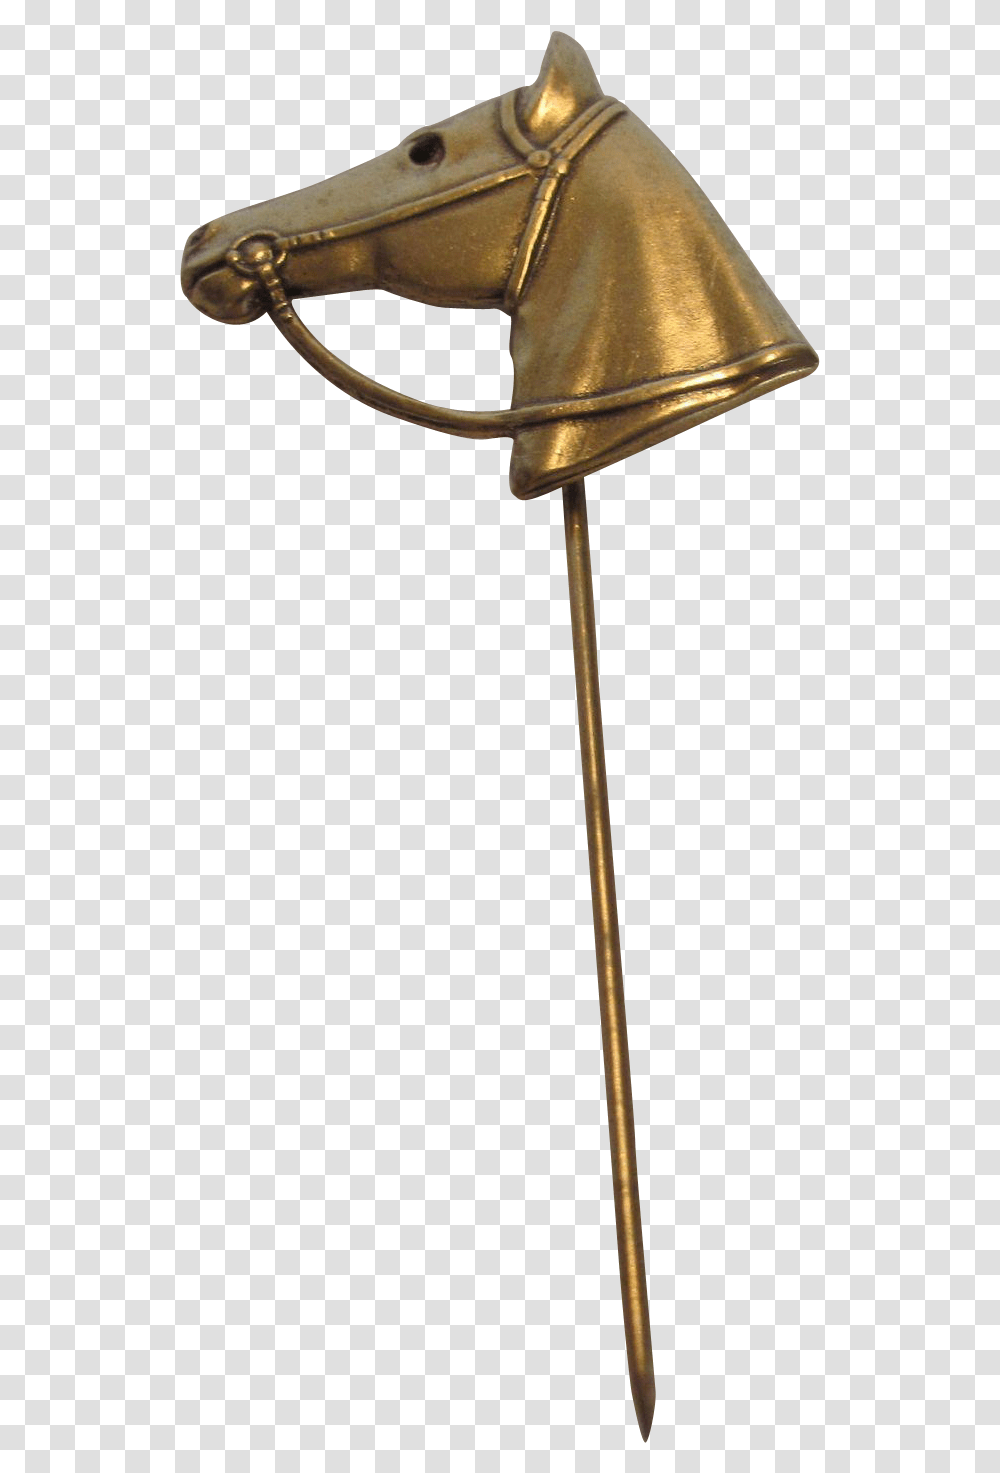 Head On Stick Metal Horse On Stick, Weapon, Weaponry, Axe, Tool Transparent Png